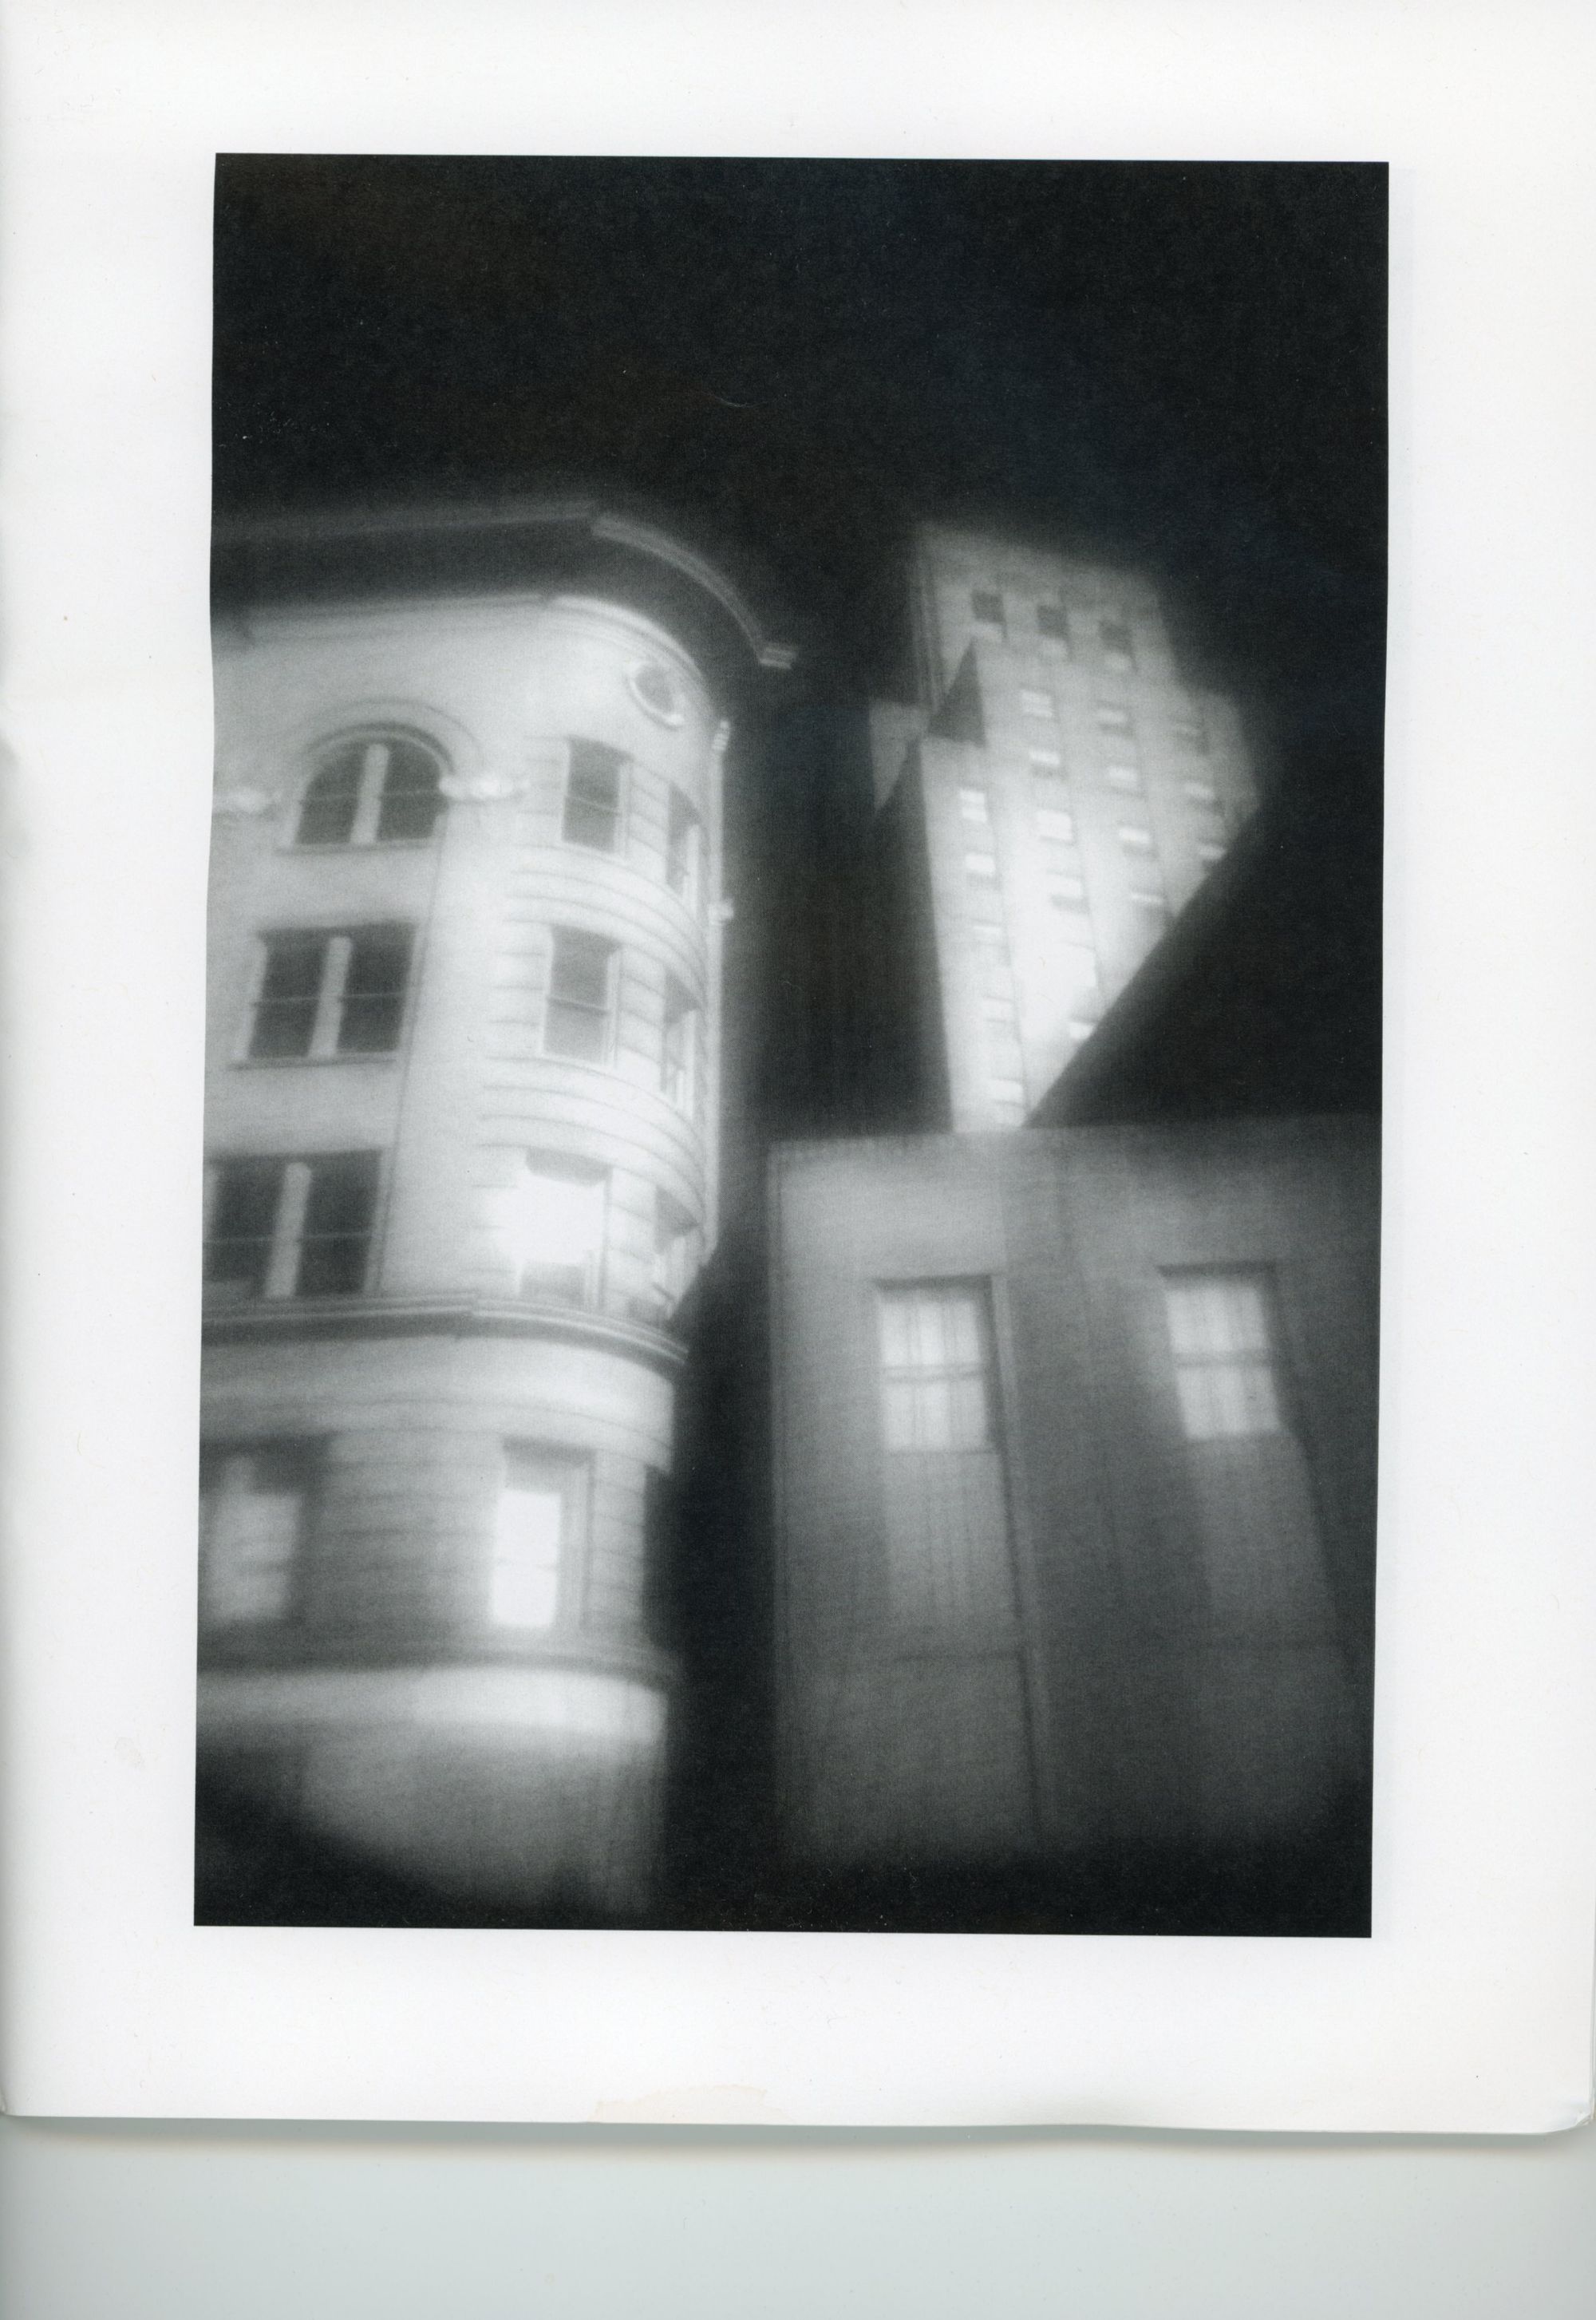 This is a haunting, somewhat ethereal photo of several old, brick buildings in black and white. Infrared maybe. From Chuck Cunningham's No Context zine, #6